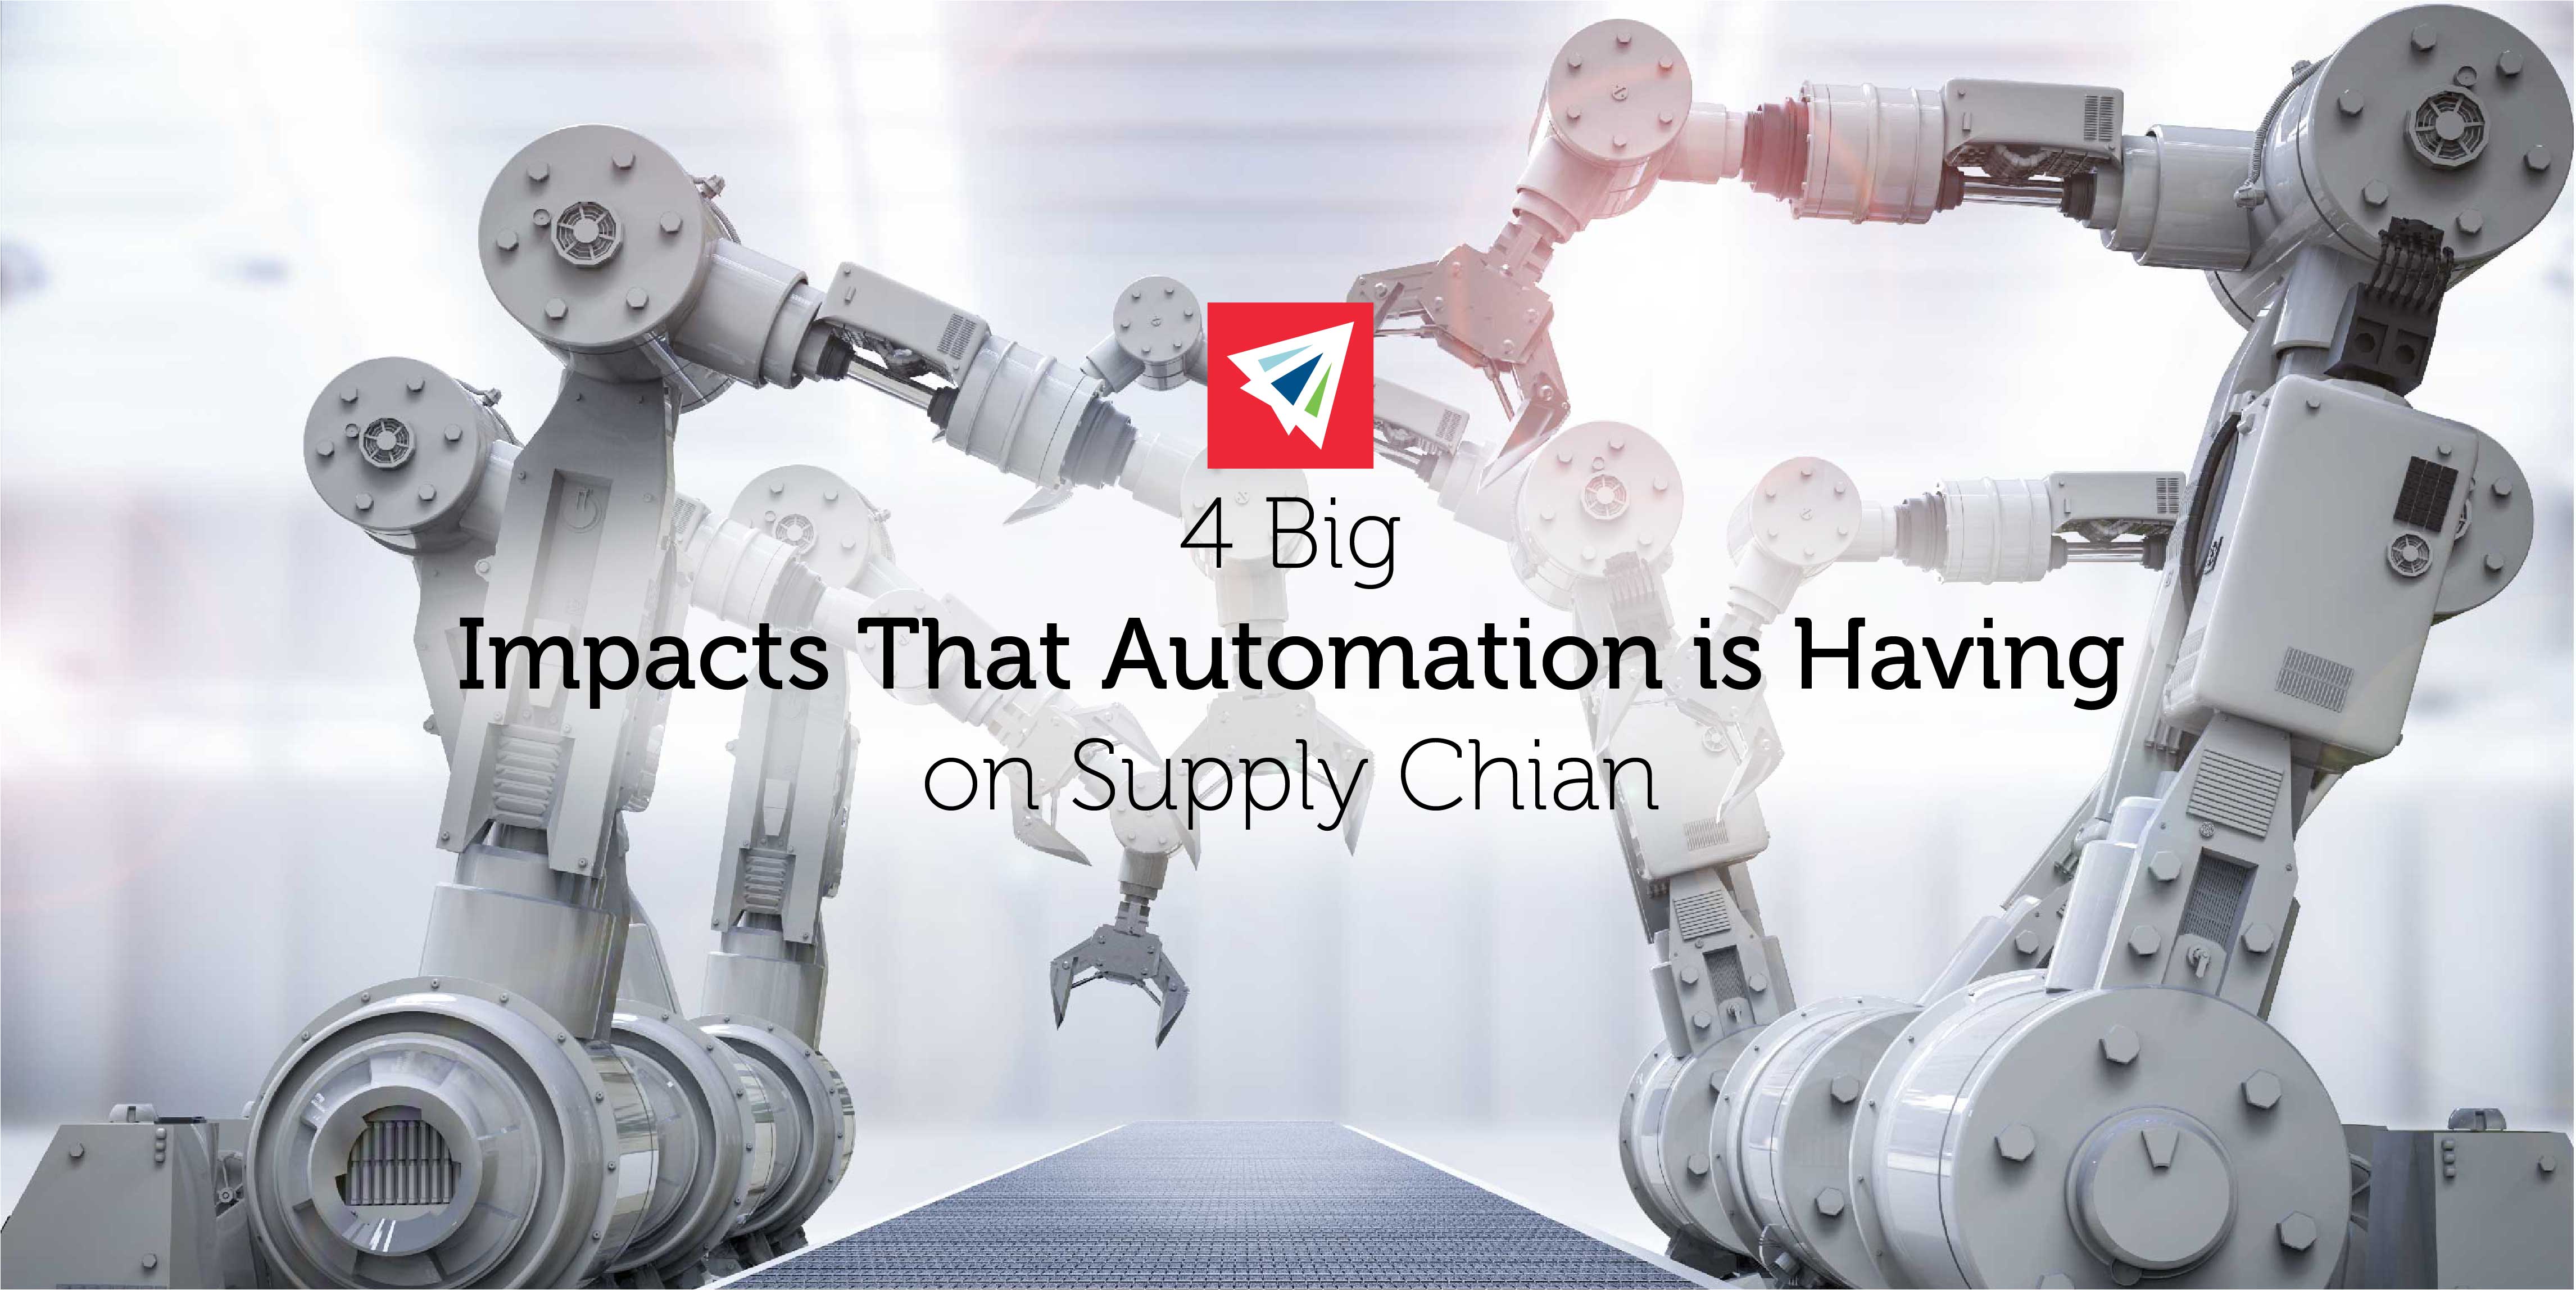 Automation: 4 Big Impacts of Automation in Supply Chain